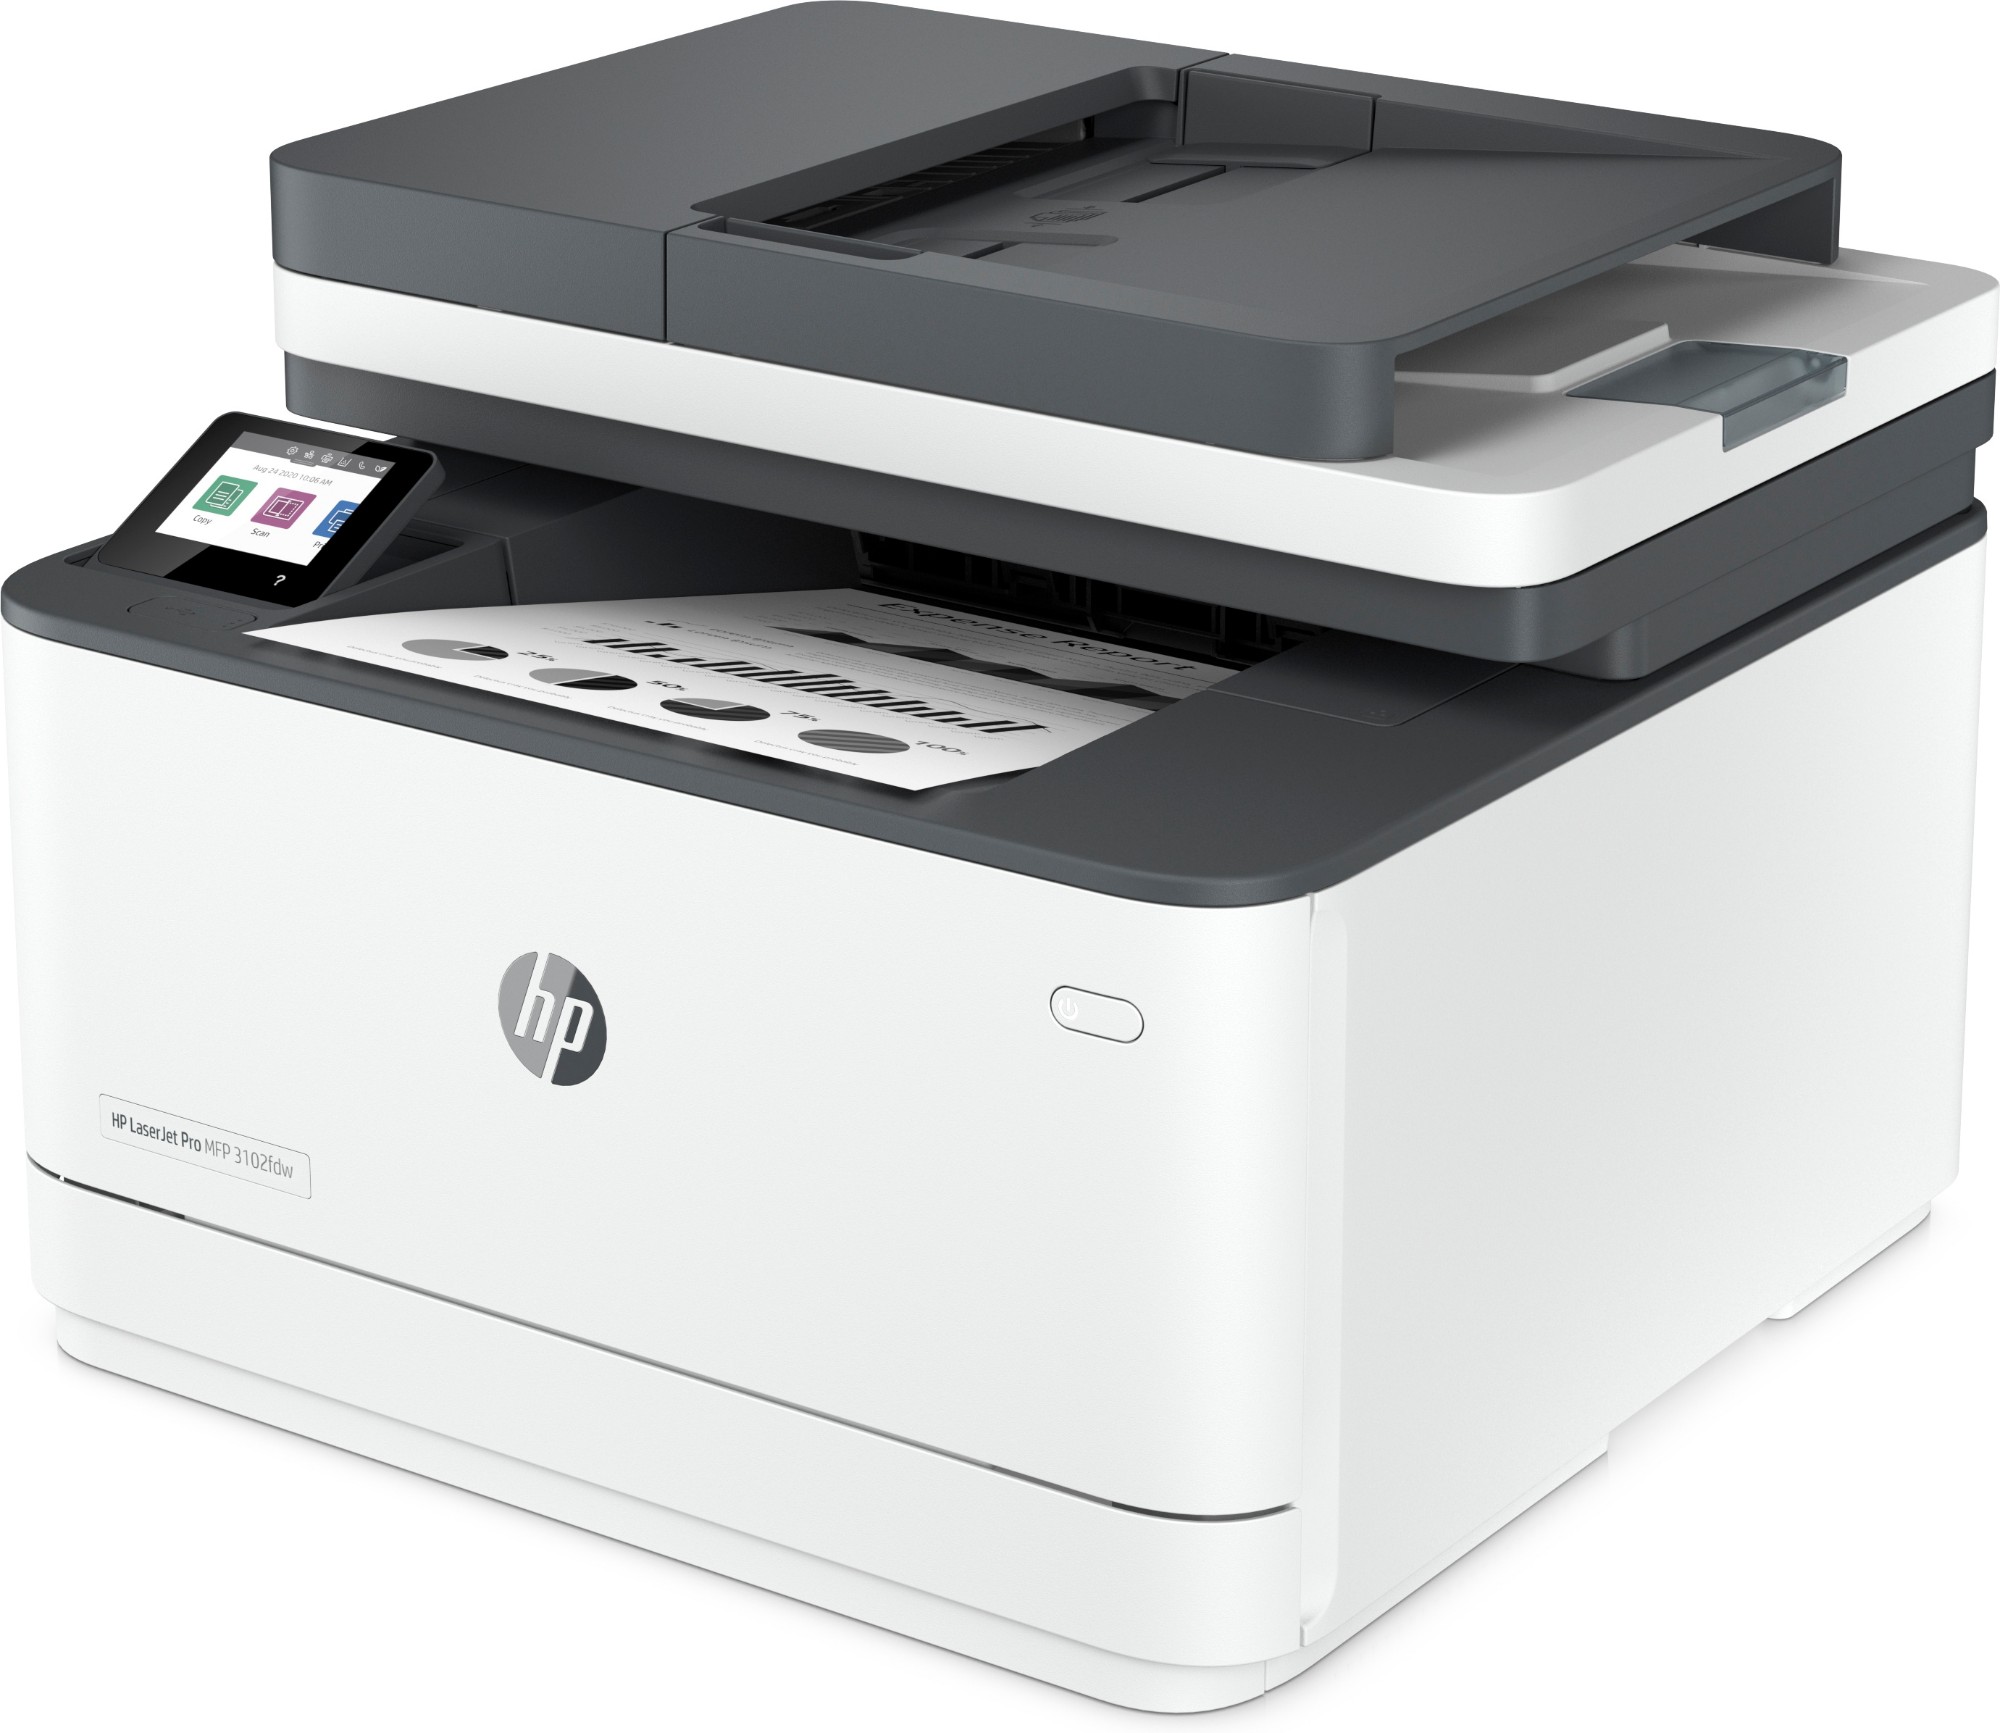 HP LaserJet Pro MFP 3102fdw Printer, Black and white, Printer for Small medium business, Print, copy, scan, fax, Wireless; Print from phone or tablet; Two-sided printing; Two-sided scanning; Fax